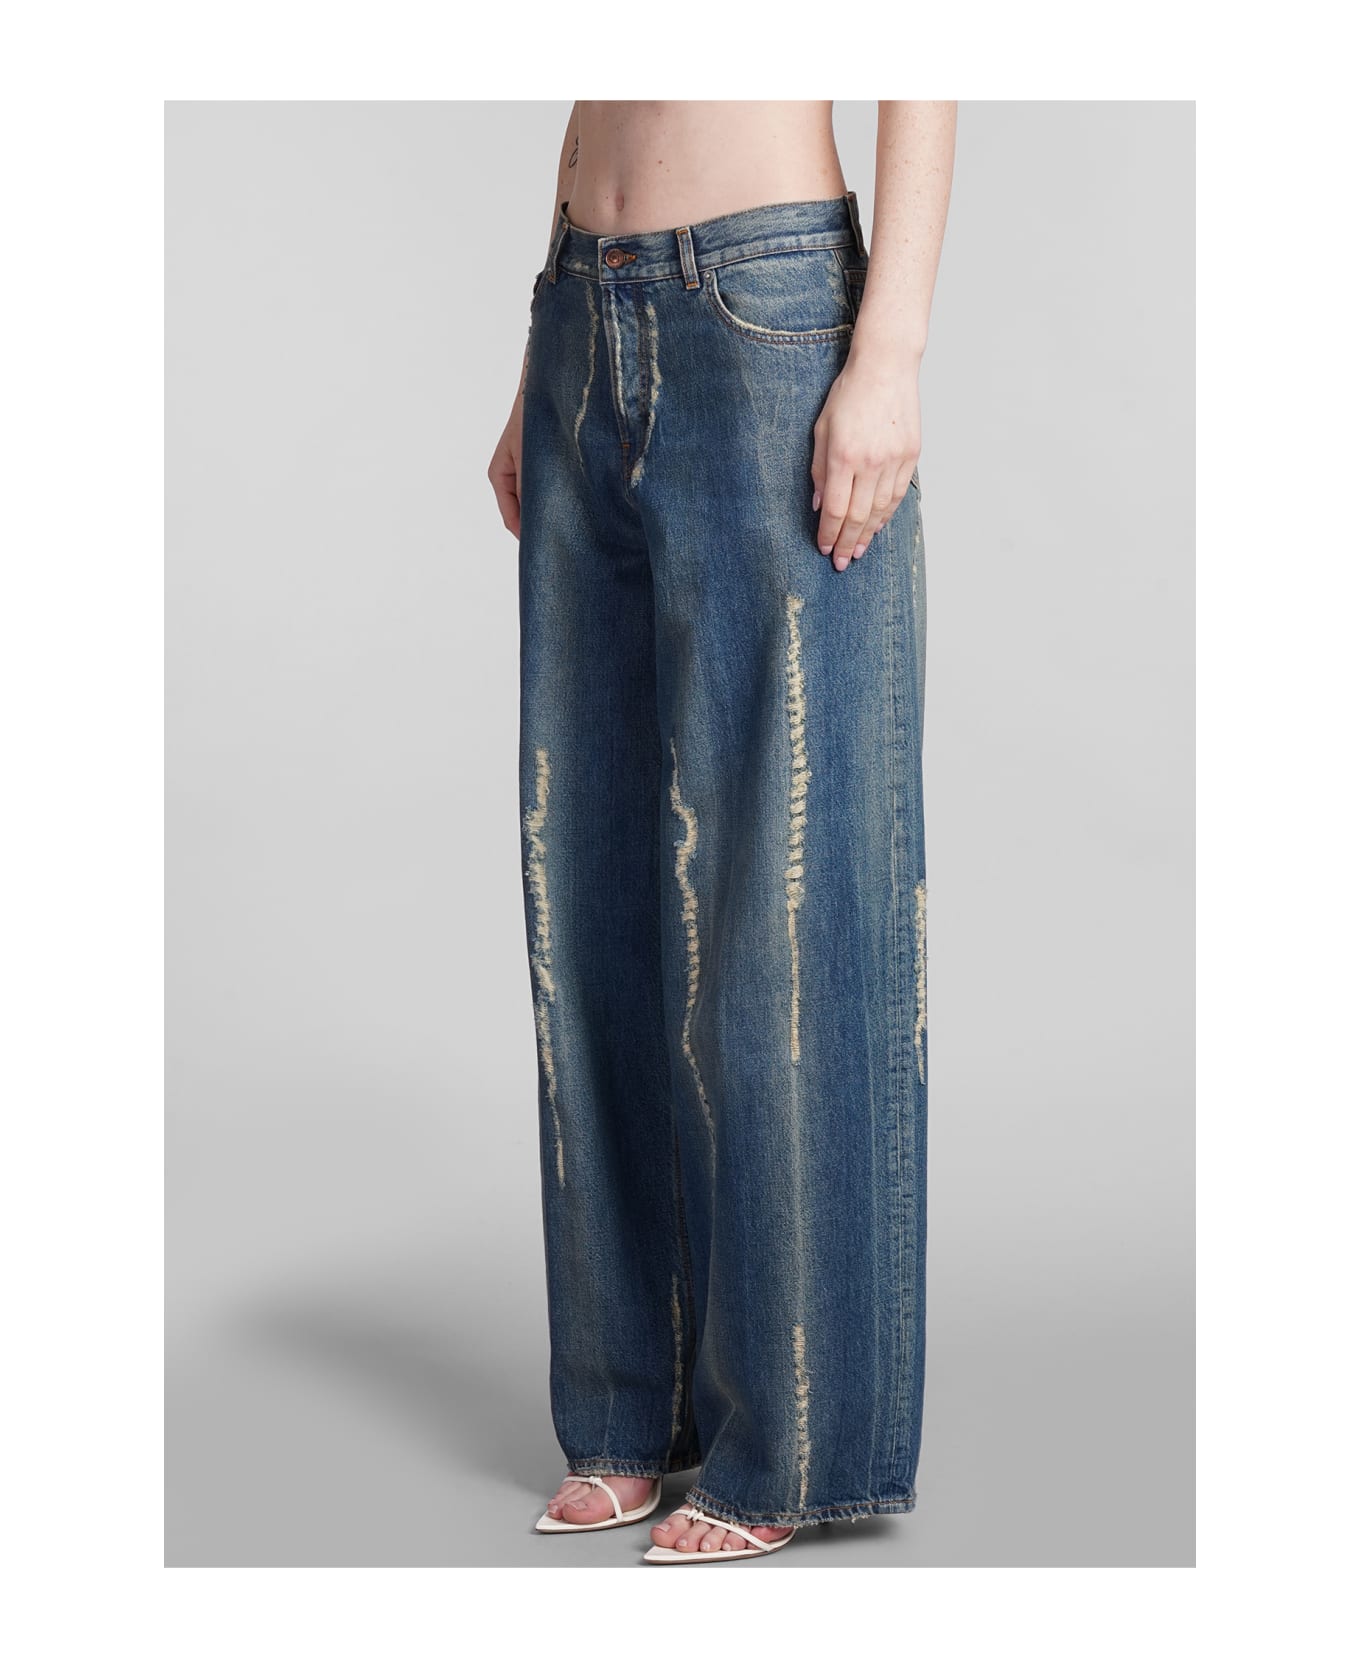 Haikure Bethany Jeans In Blue Cotton - blue デニム